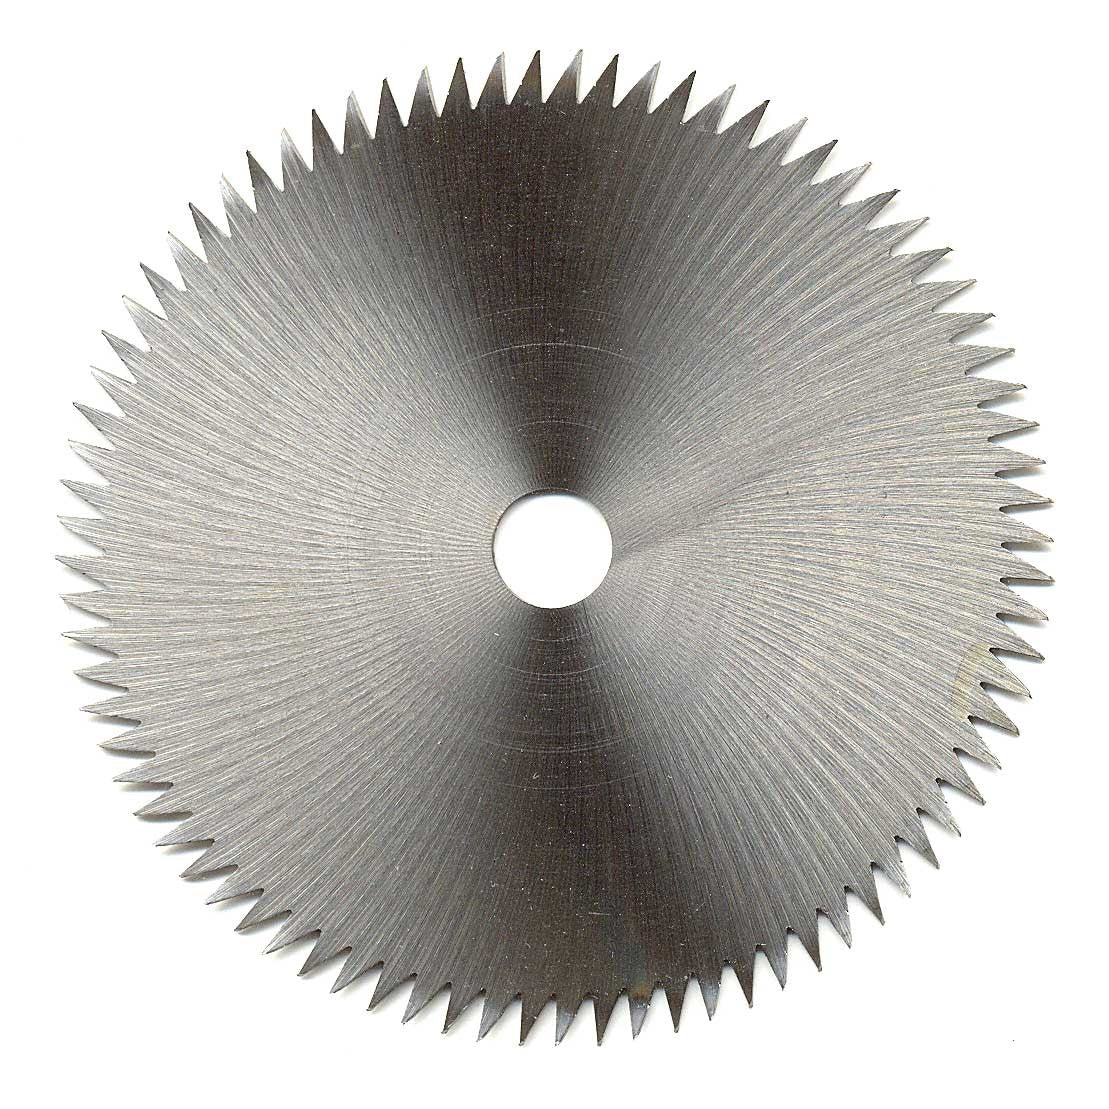 80 Tooth Saw Blade (3-1/4 Inch Dia., 10mm Hole)